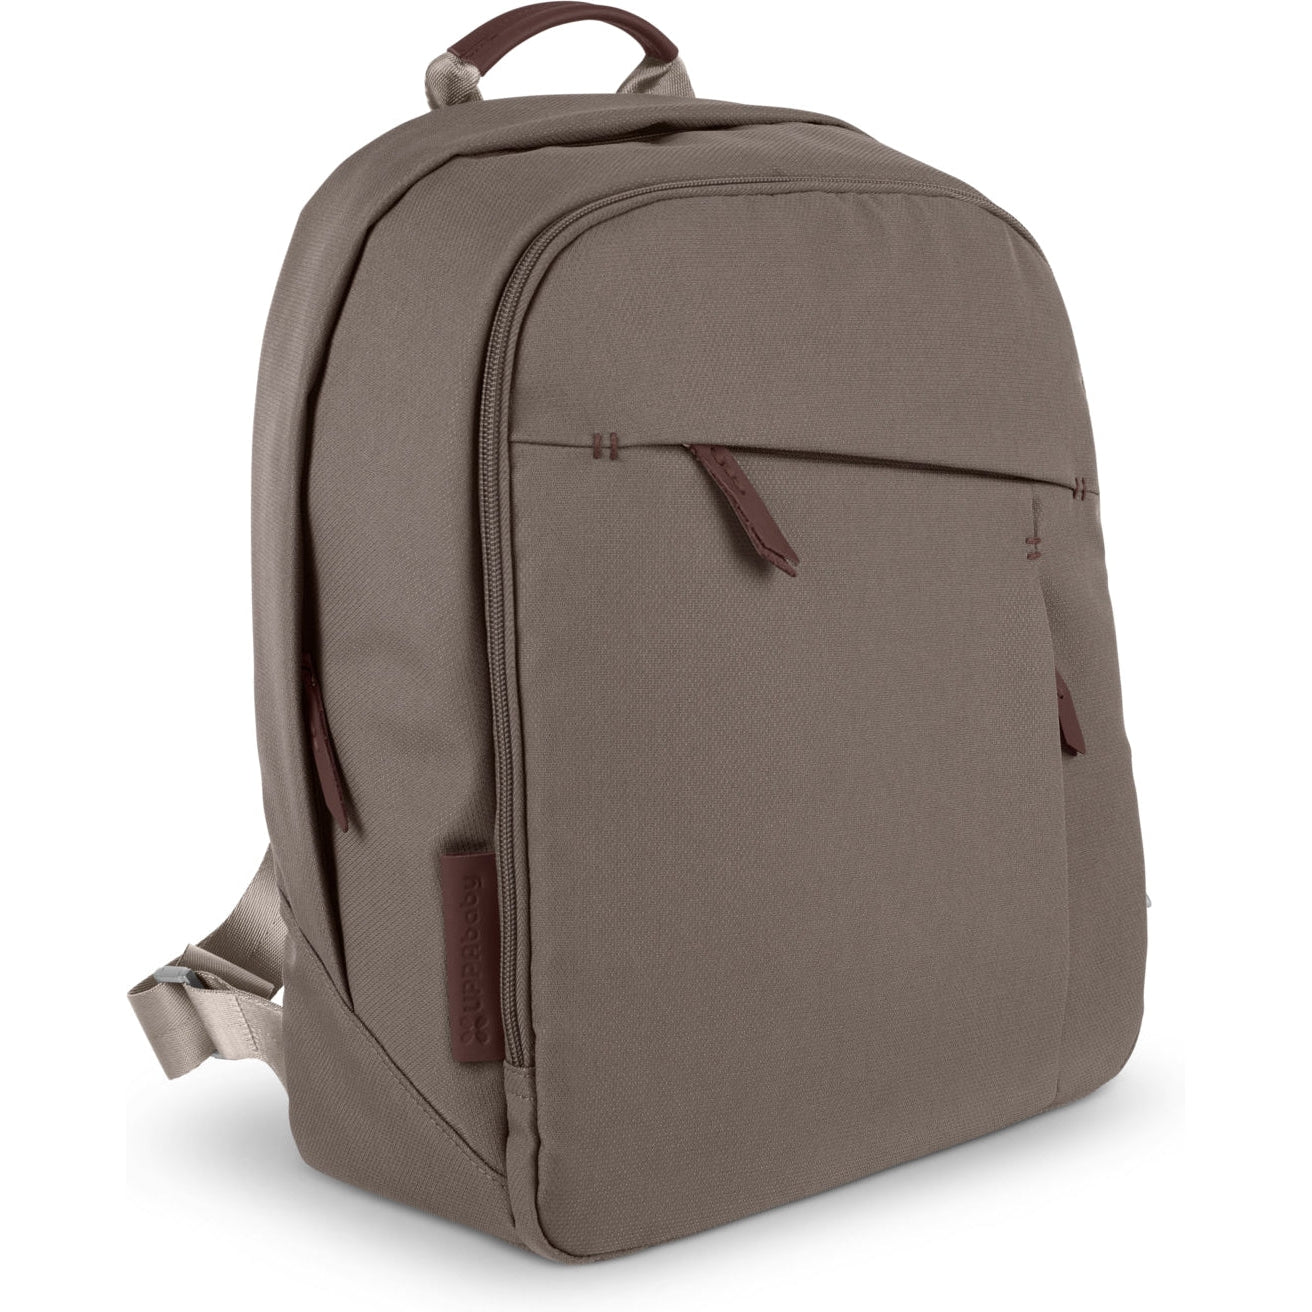 Buy theo-dark-taupe-chestnut-leather UPPAbaby Changing Backpack